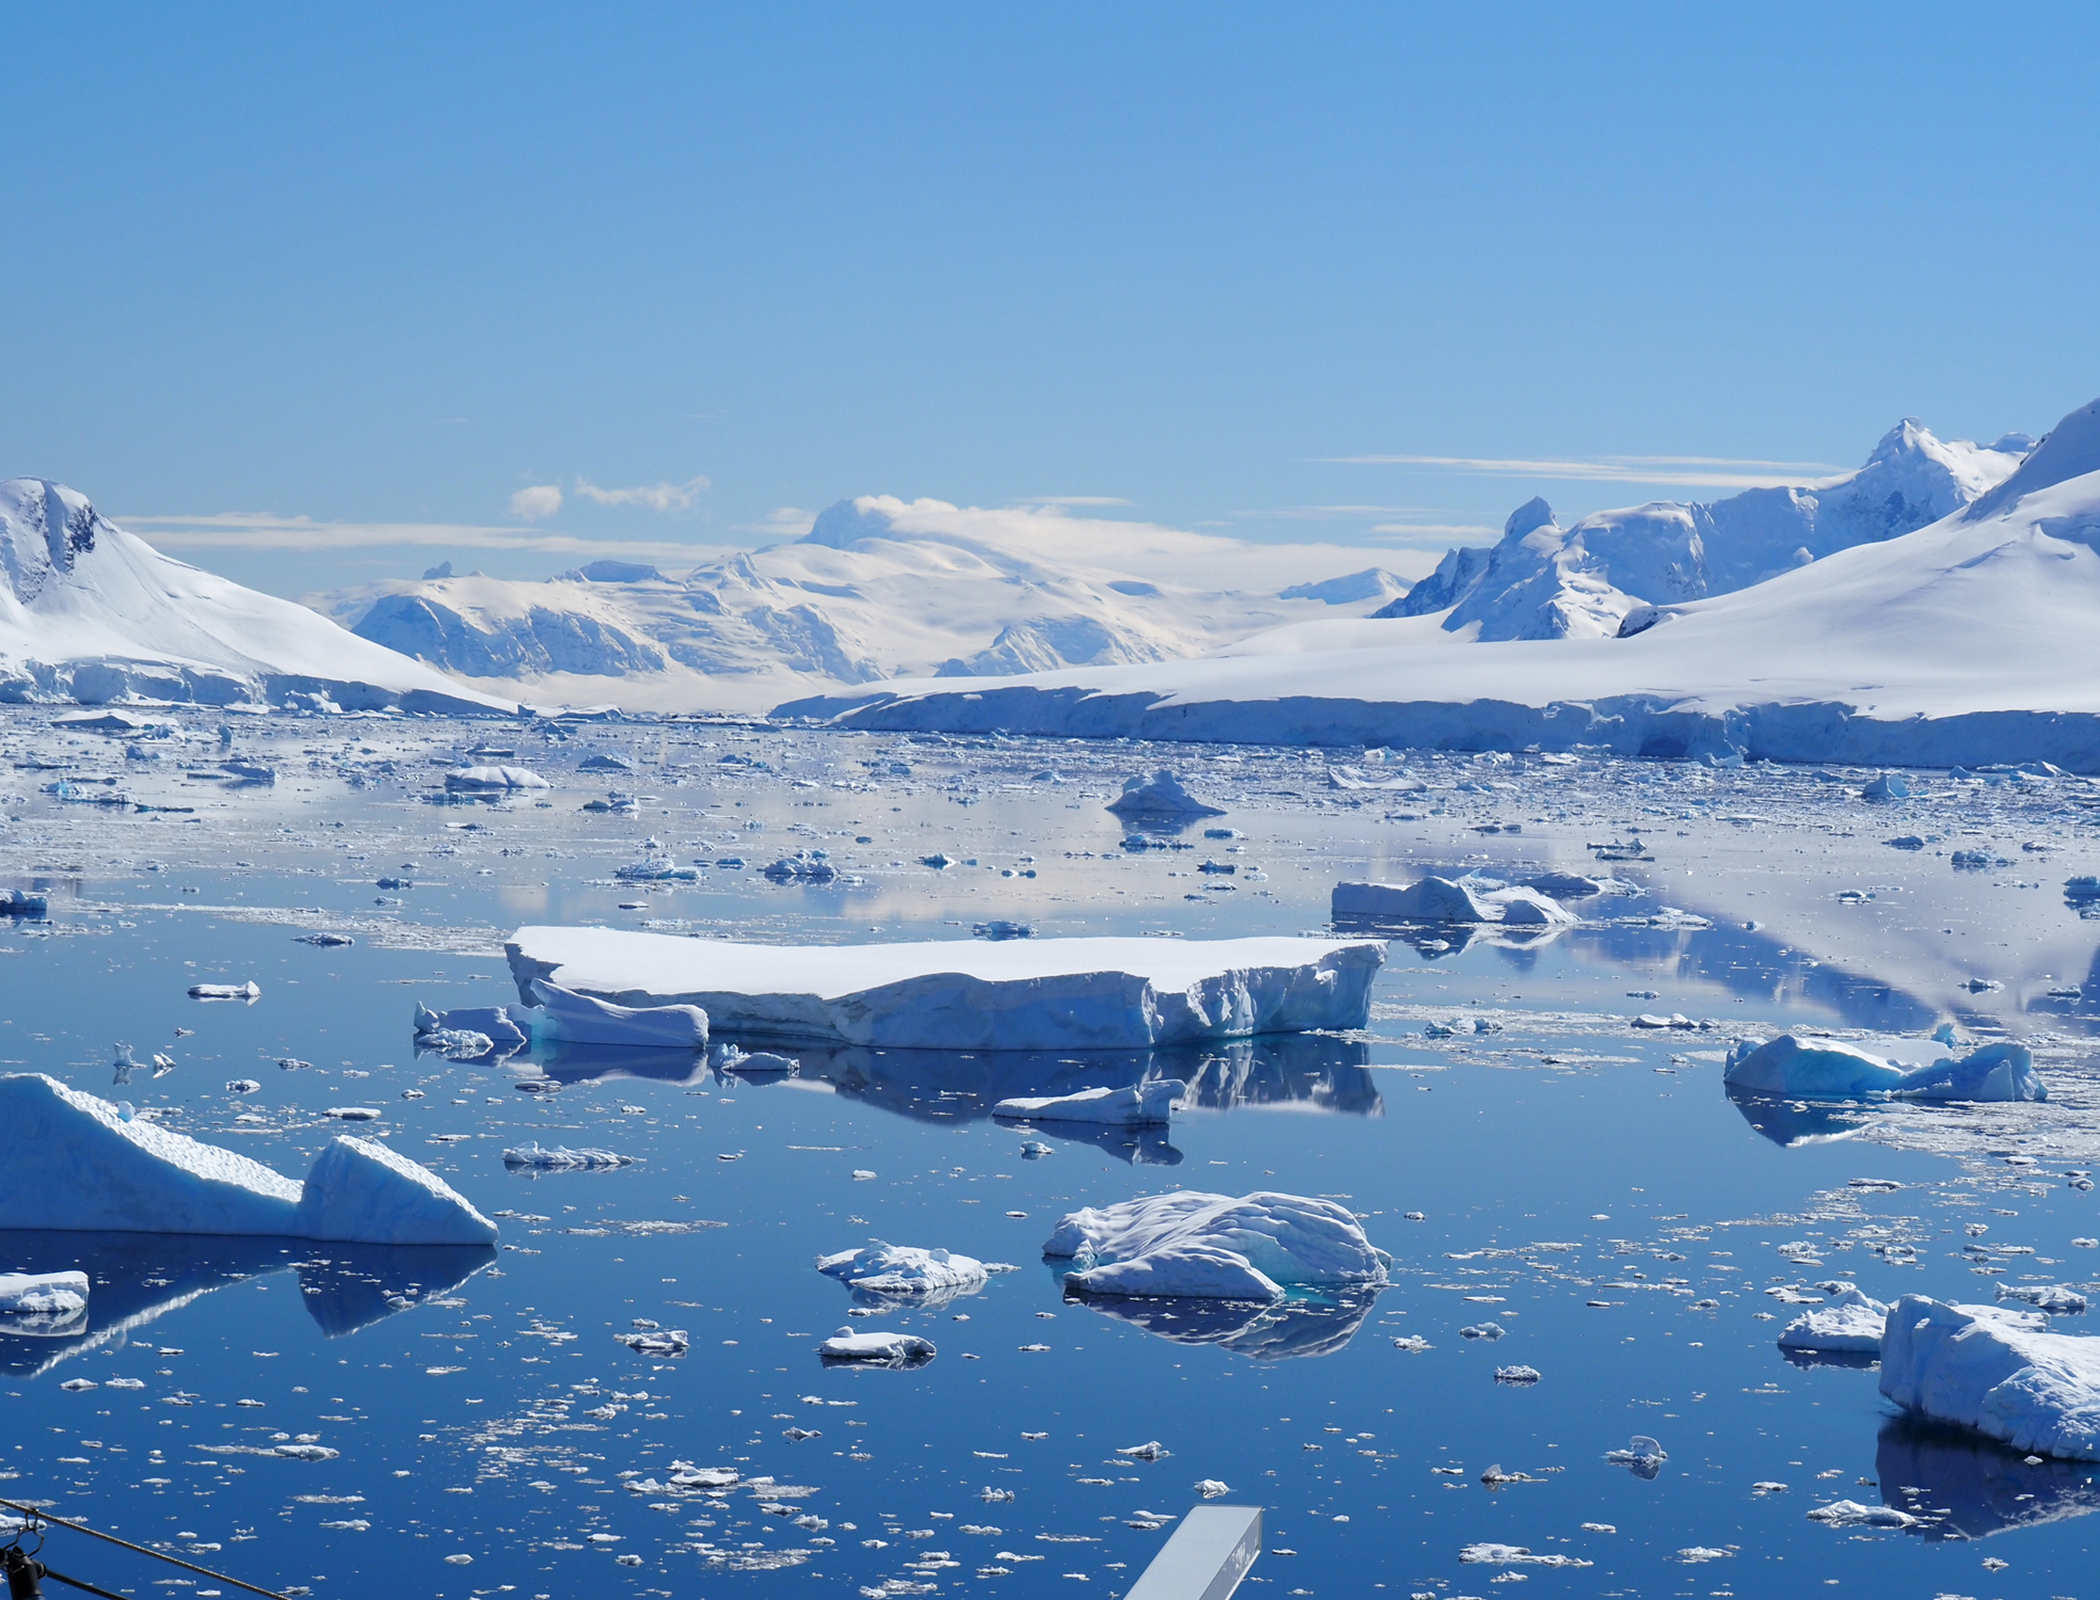 Climate engineering could slow down the melting of Antarctic ice sheets